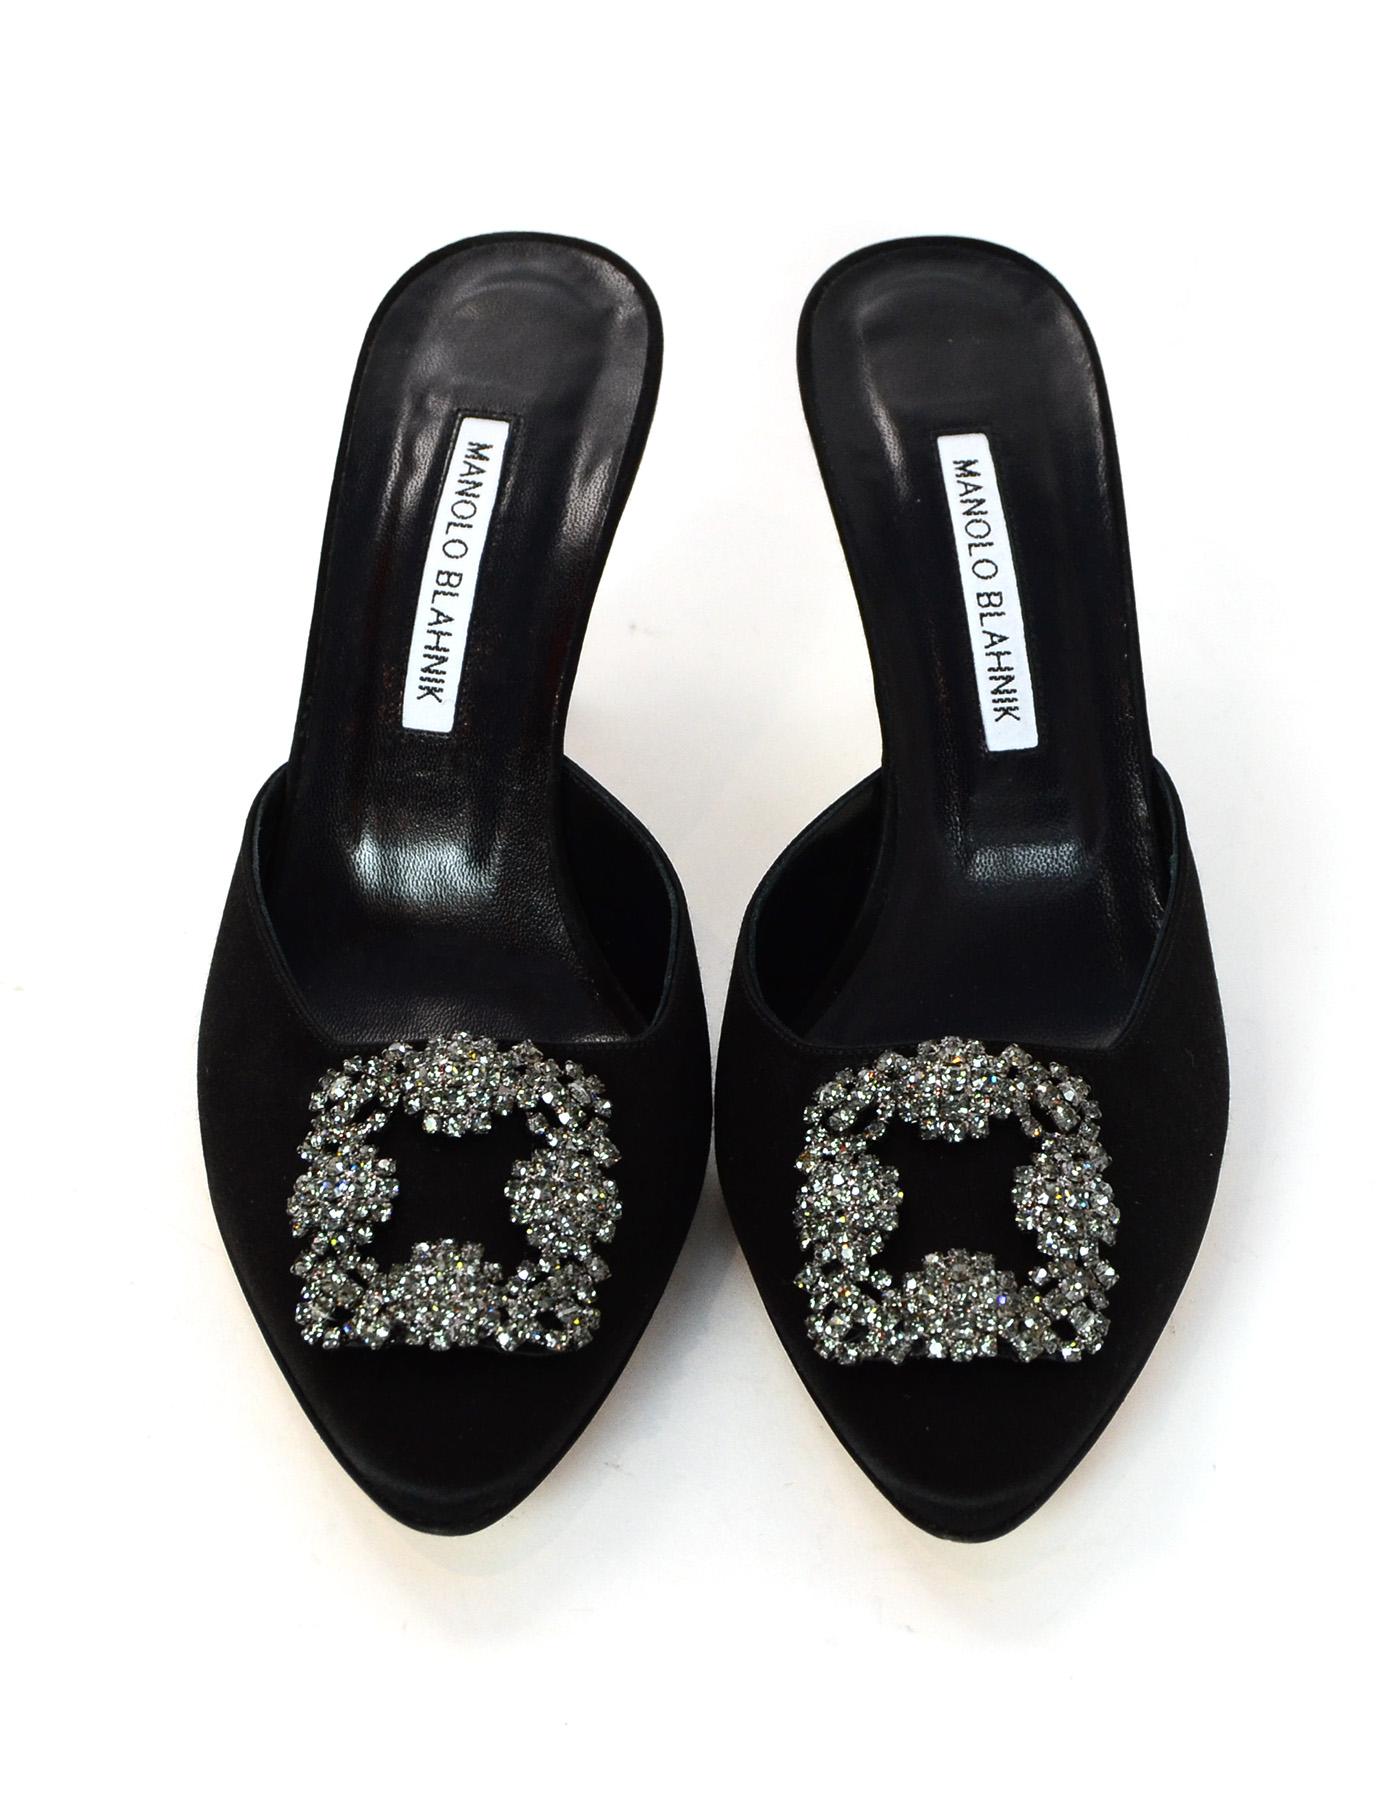 Manolo Blahnik, 2018, Black Satin/Crystal Hangisi 70 Heeled Mules Sz 39

Made In: Italy
Year of Production: 2018
Color: Black and crystal
Materials: Satin and crystal
Closure/Opening: Slide on mules
Overall Condition: Excellent pre-owned condition-